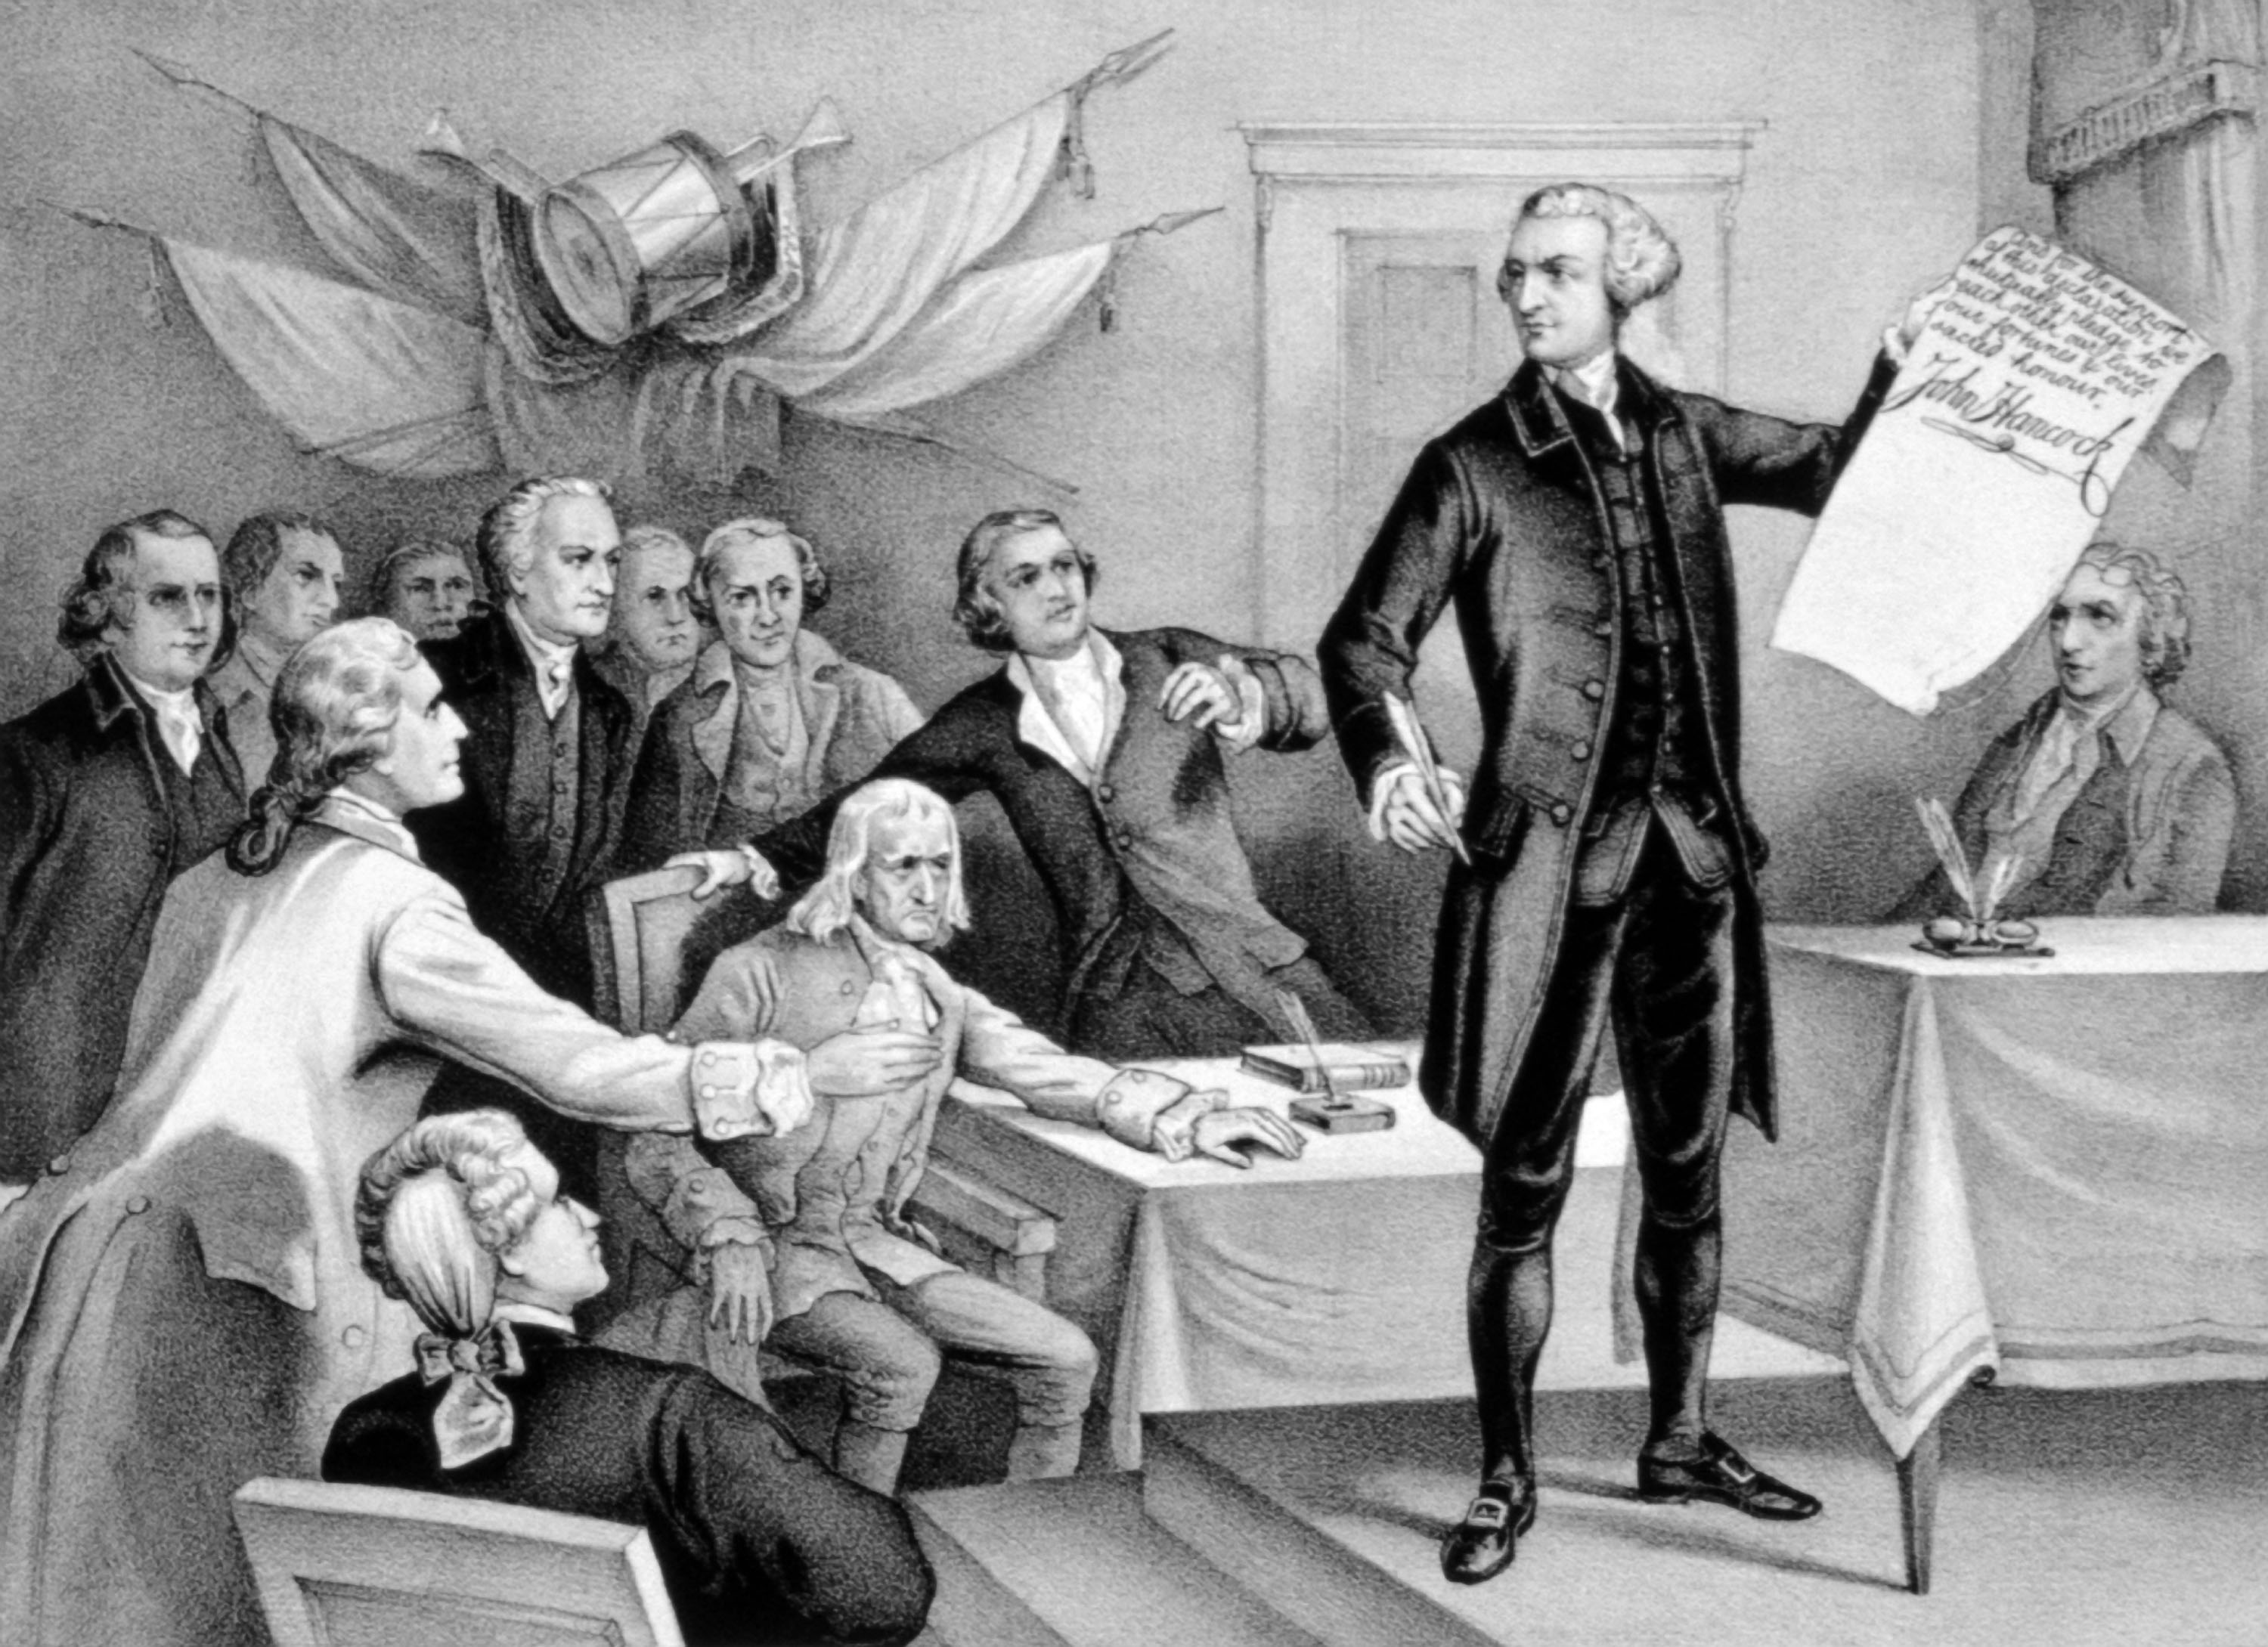 An illustration of John Hancock at the signing of the Declaration of Independence.